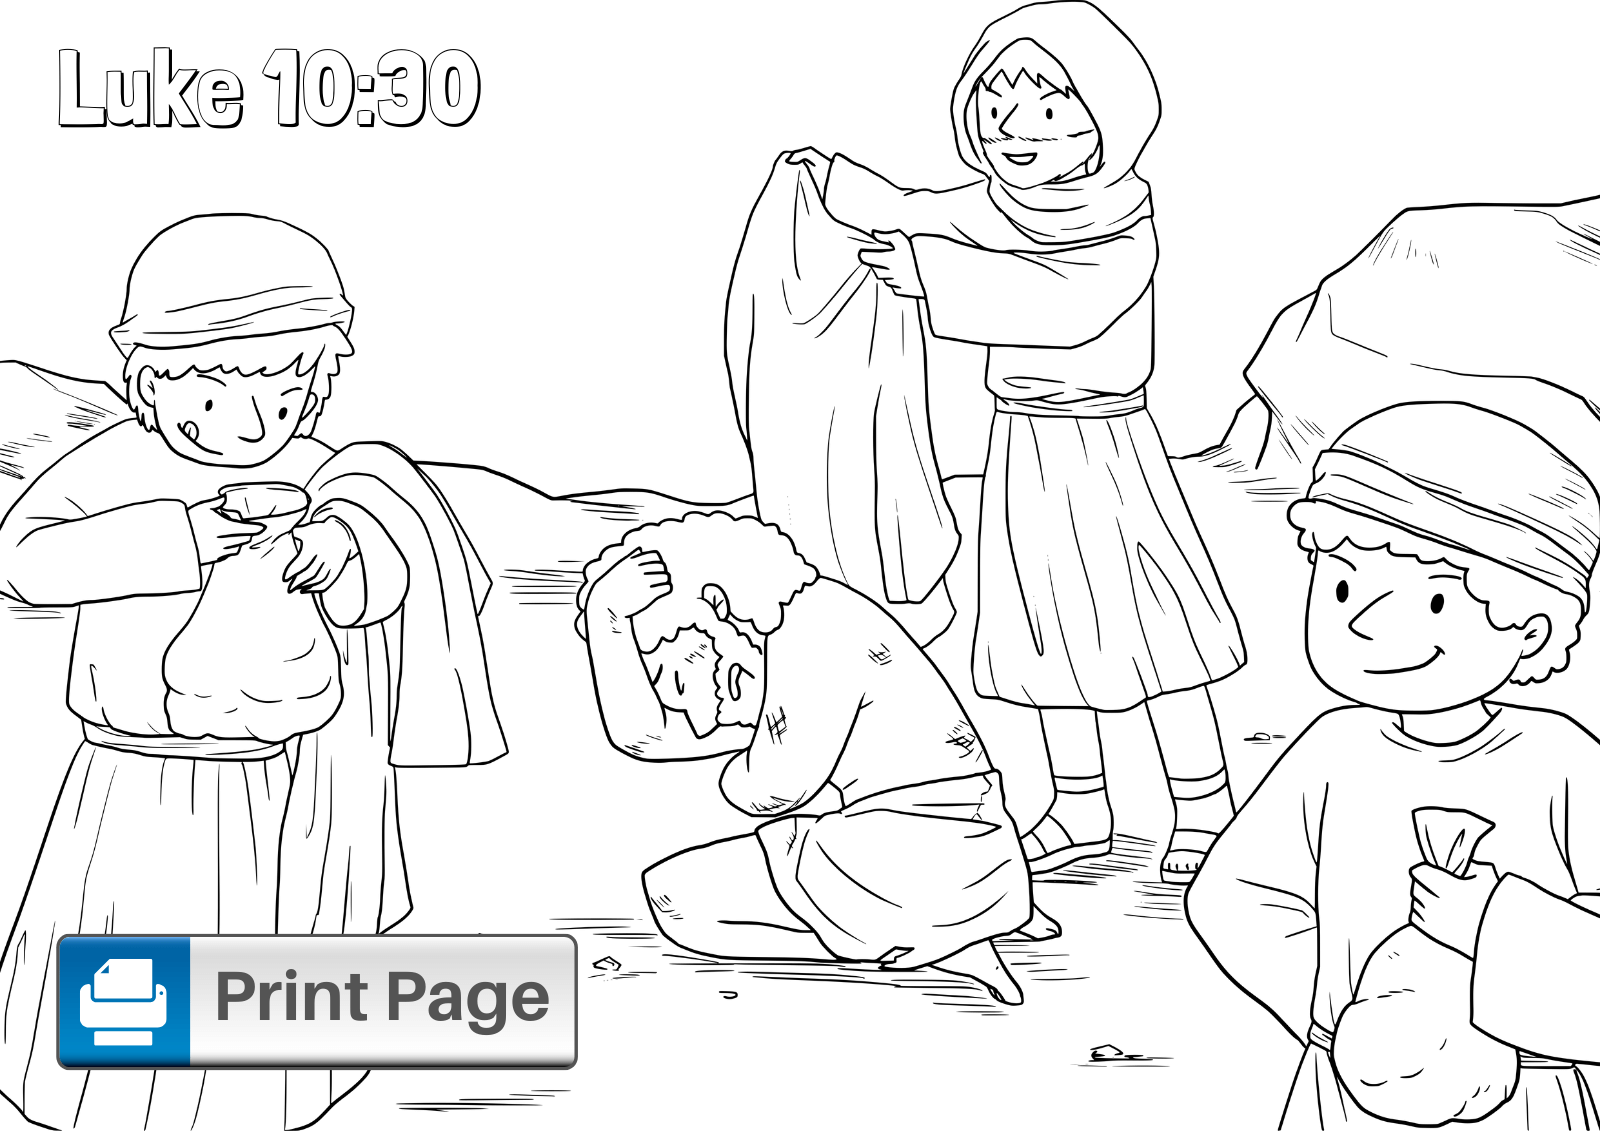 Free good samaritan coloring pages for kids printable pdfs â connectus